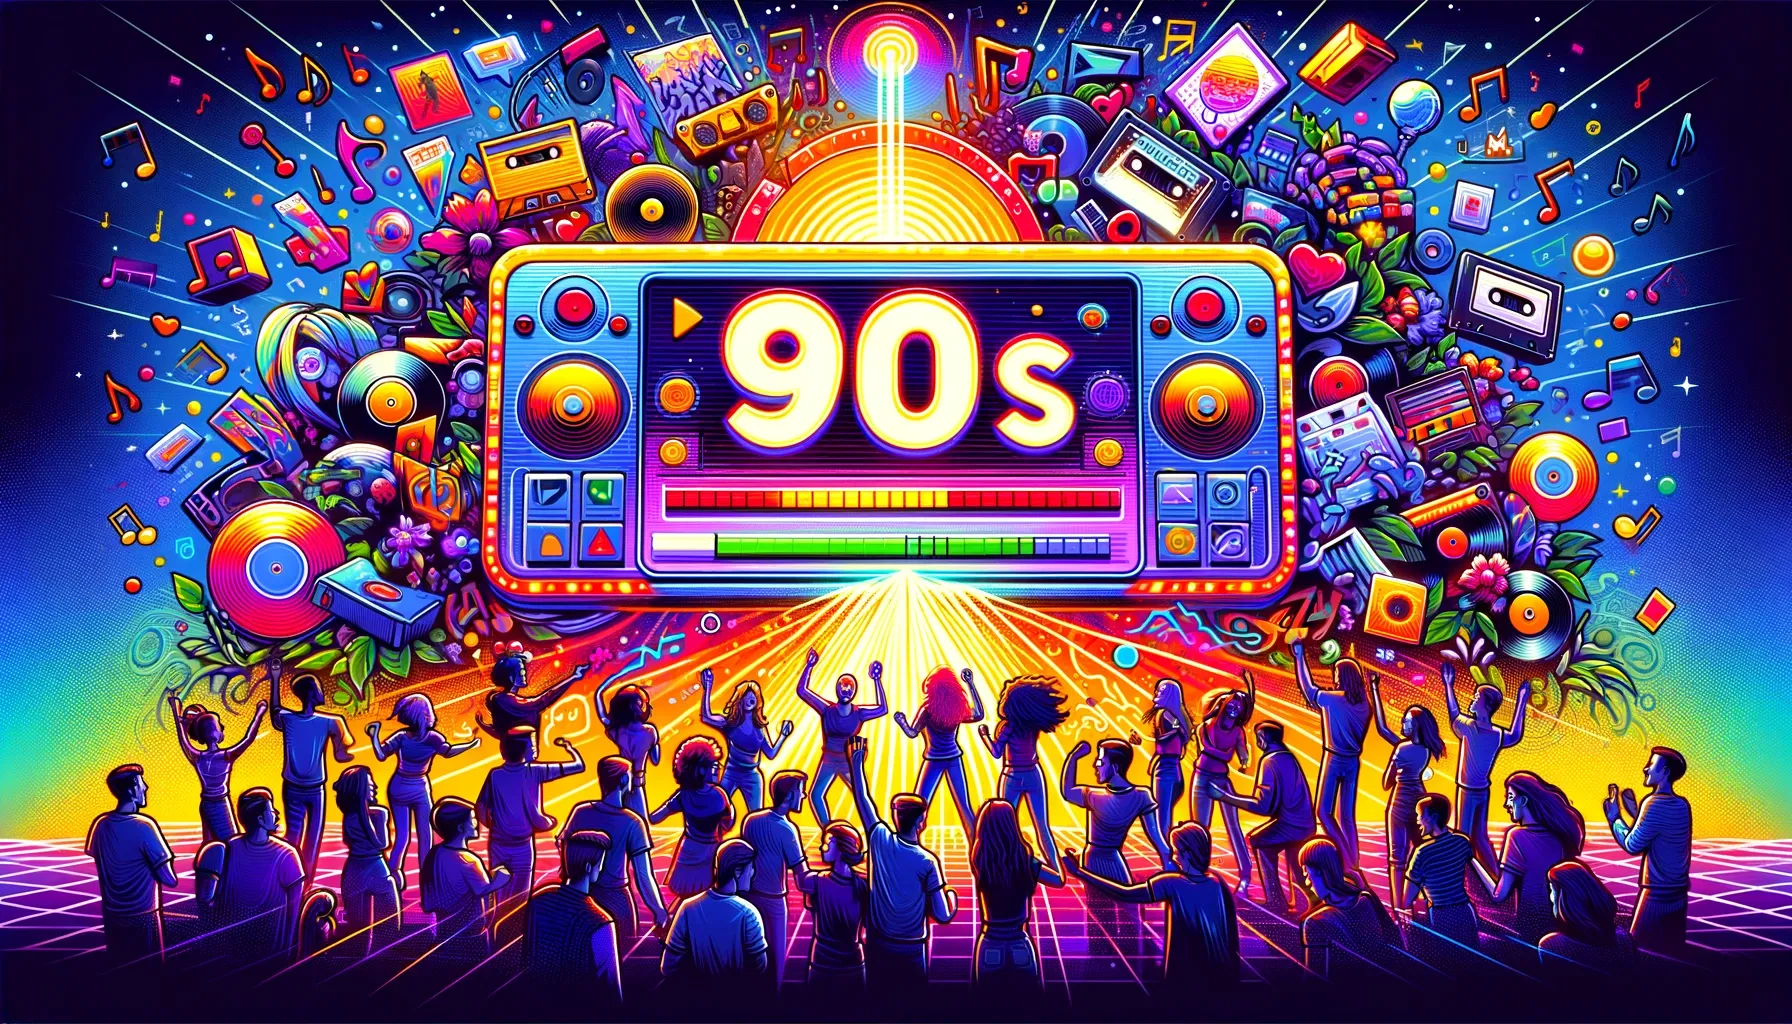 Heardle 90s: Listen 90s Music and Songs